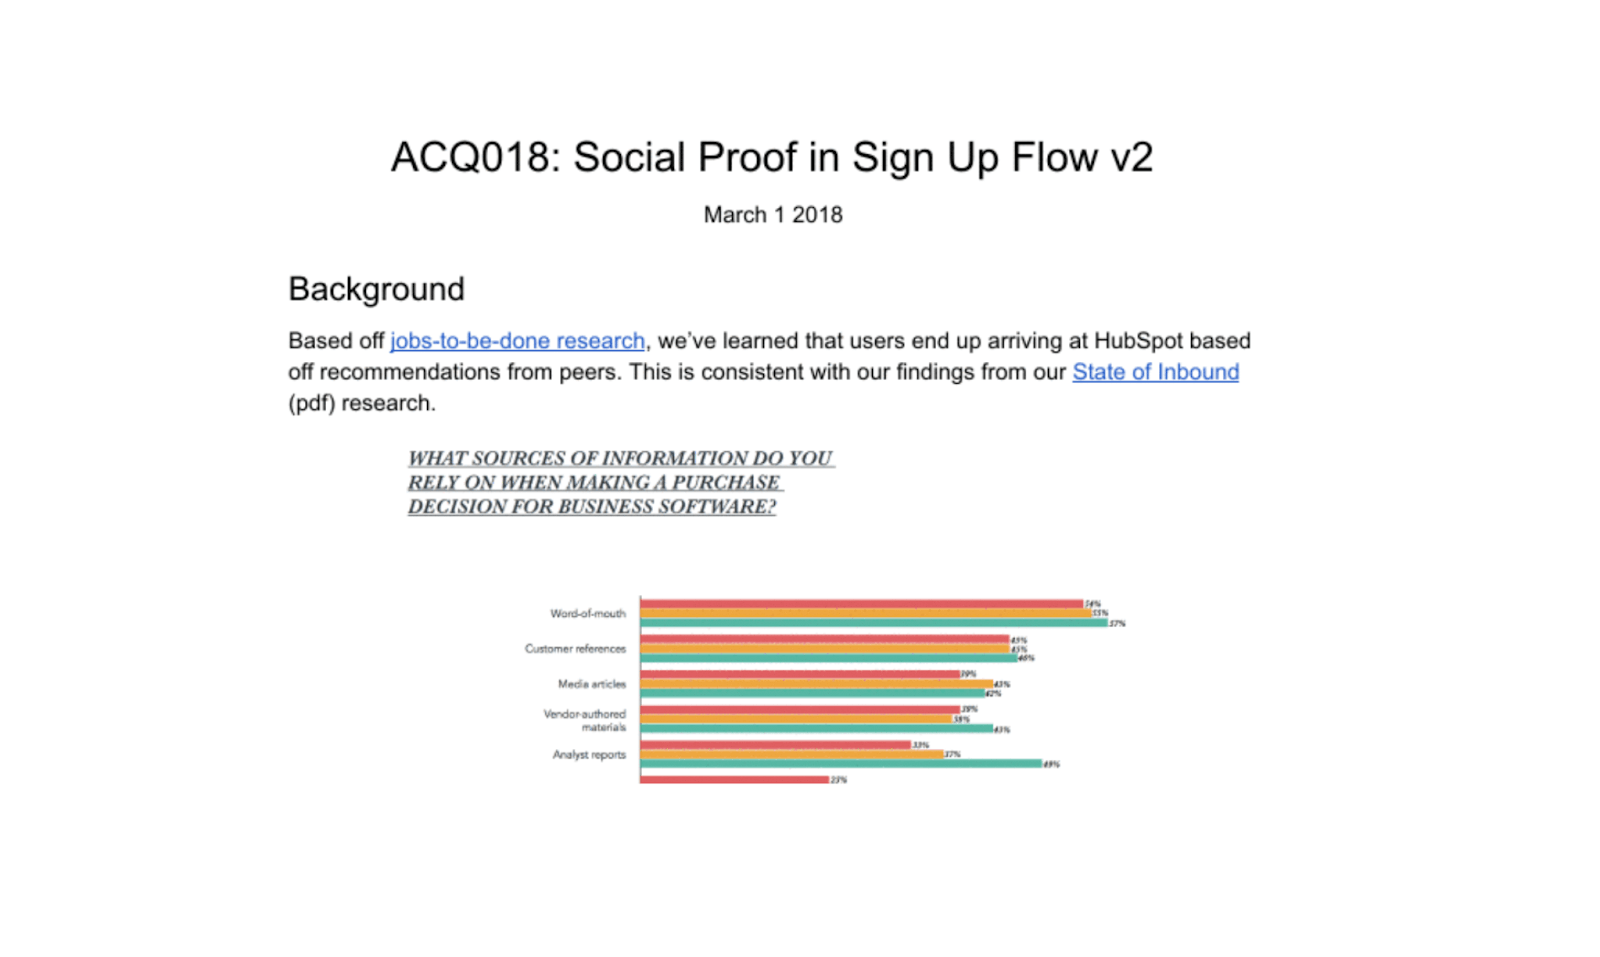 ACQ018 social proof and sign up flow v2